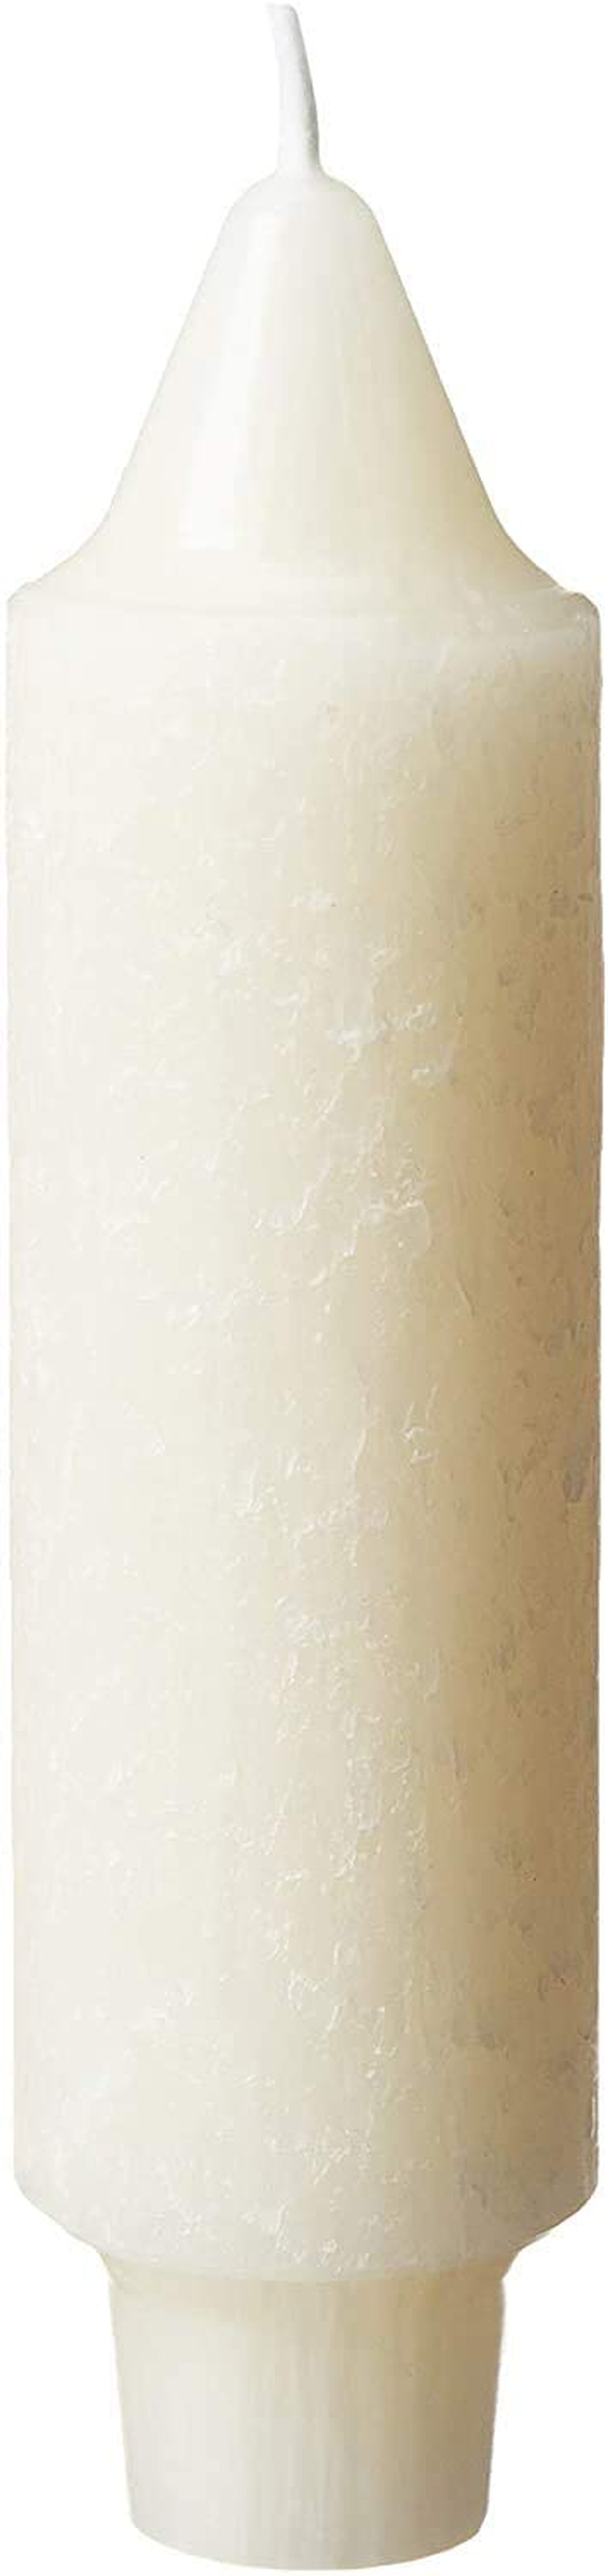 Root Candles 59517 Unscented Timberline Collenette 5-Inch Dinner Candles, 8-Count, Ivory Home & Garden > Decor > Home Fragrances > Candles Root Candles   